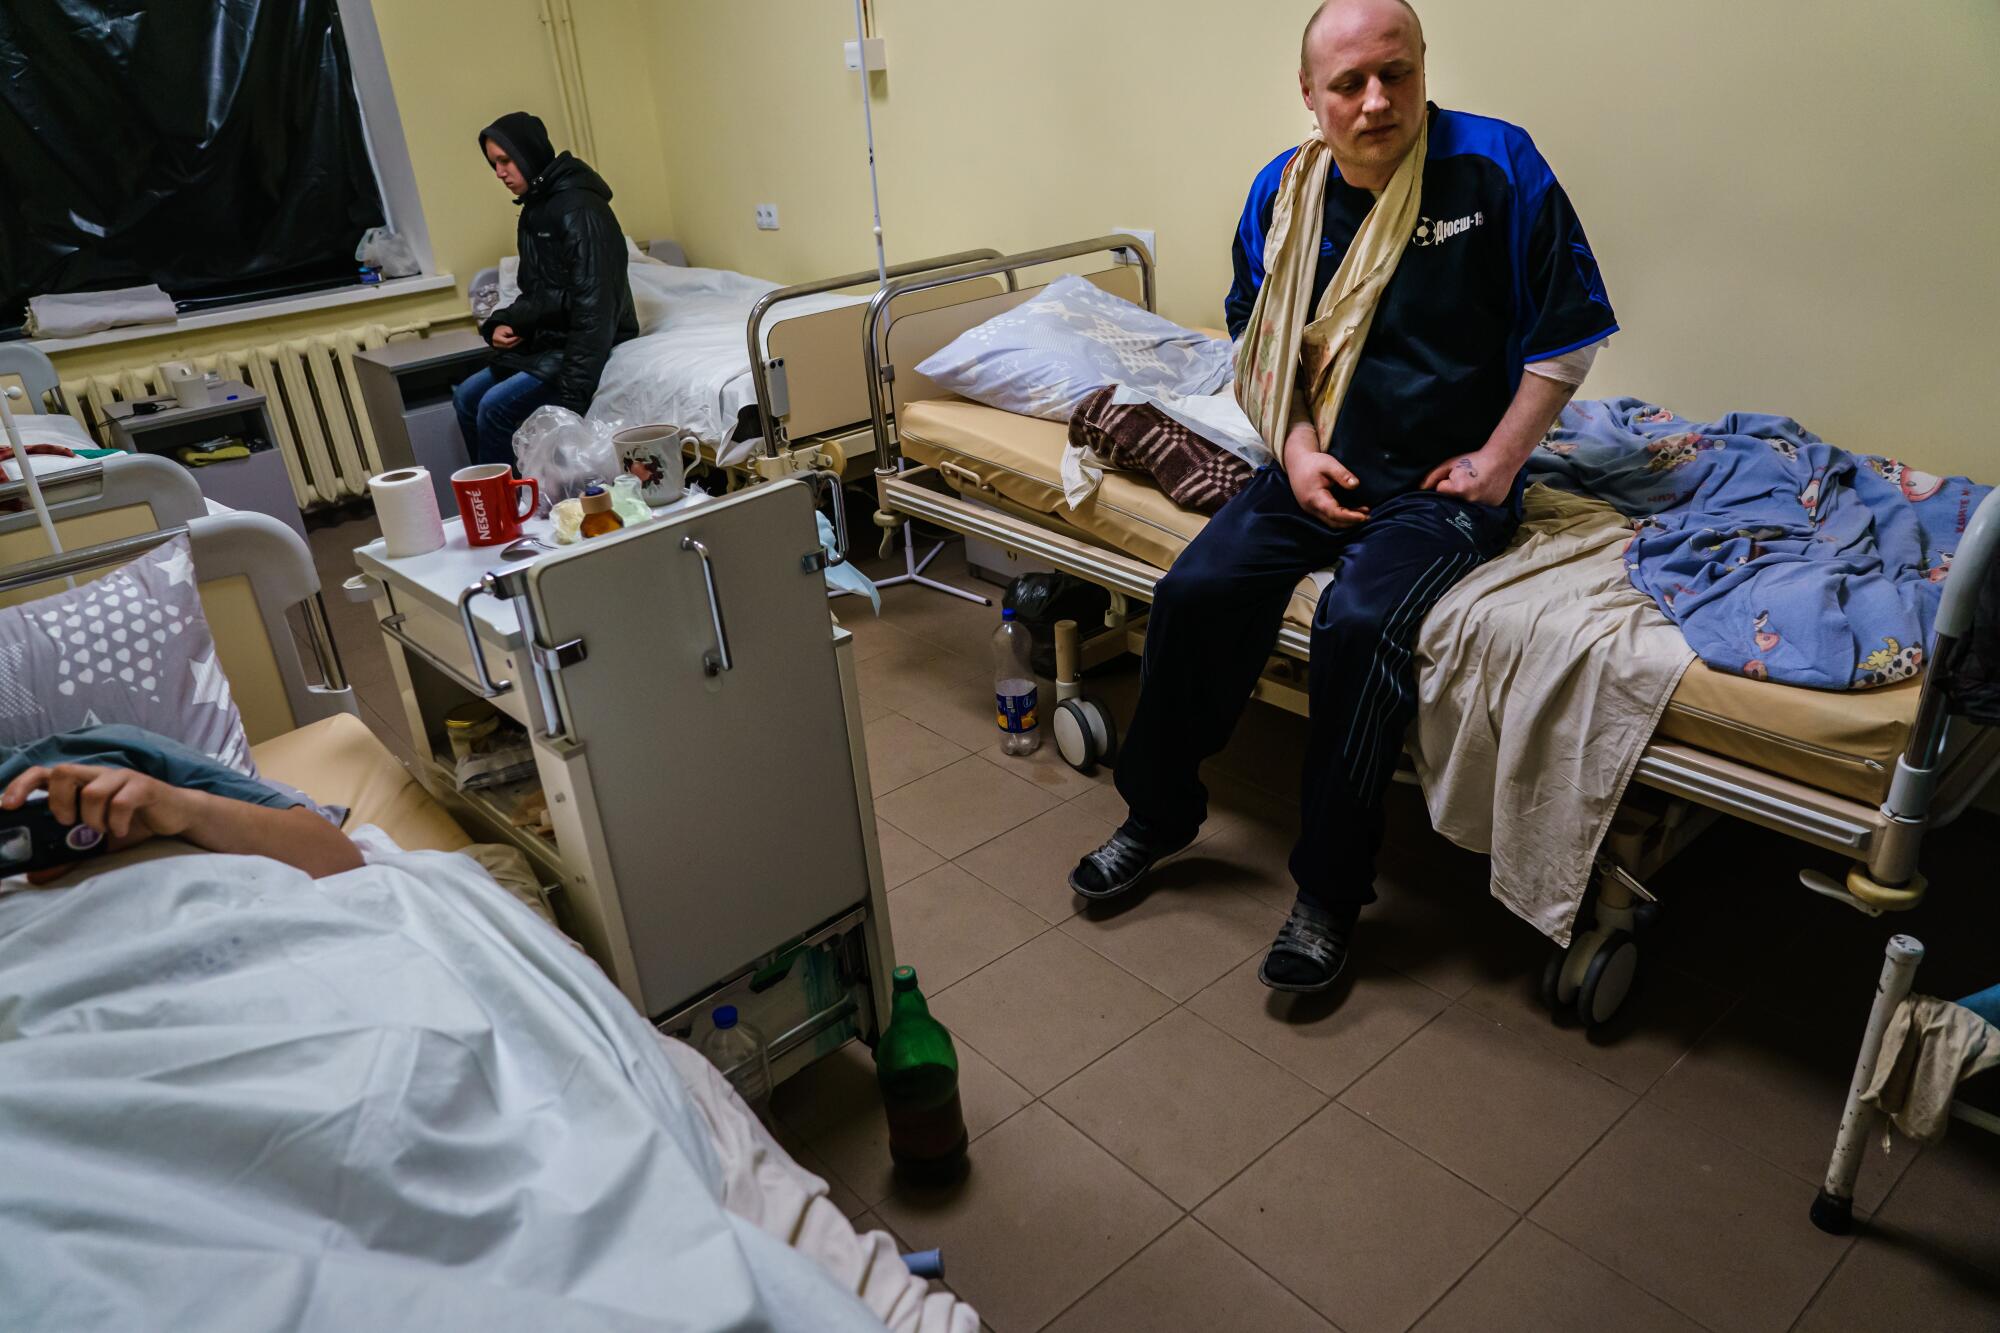 Andre Kholyavko, injured in a Russian bombardment, recovers at a hospital in Kozolets, Ukraine.